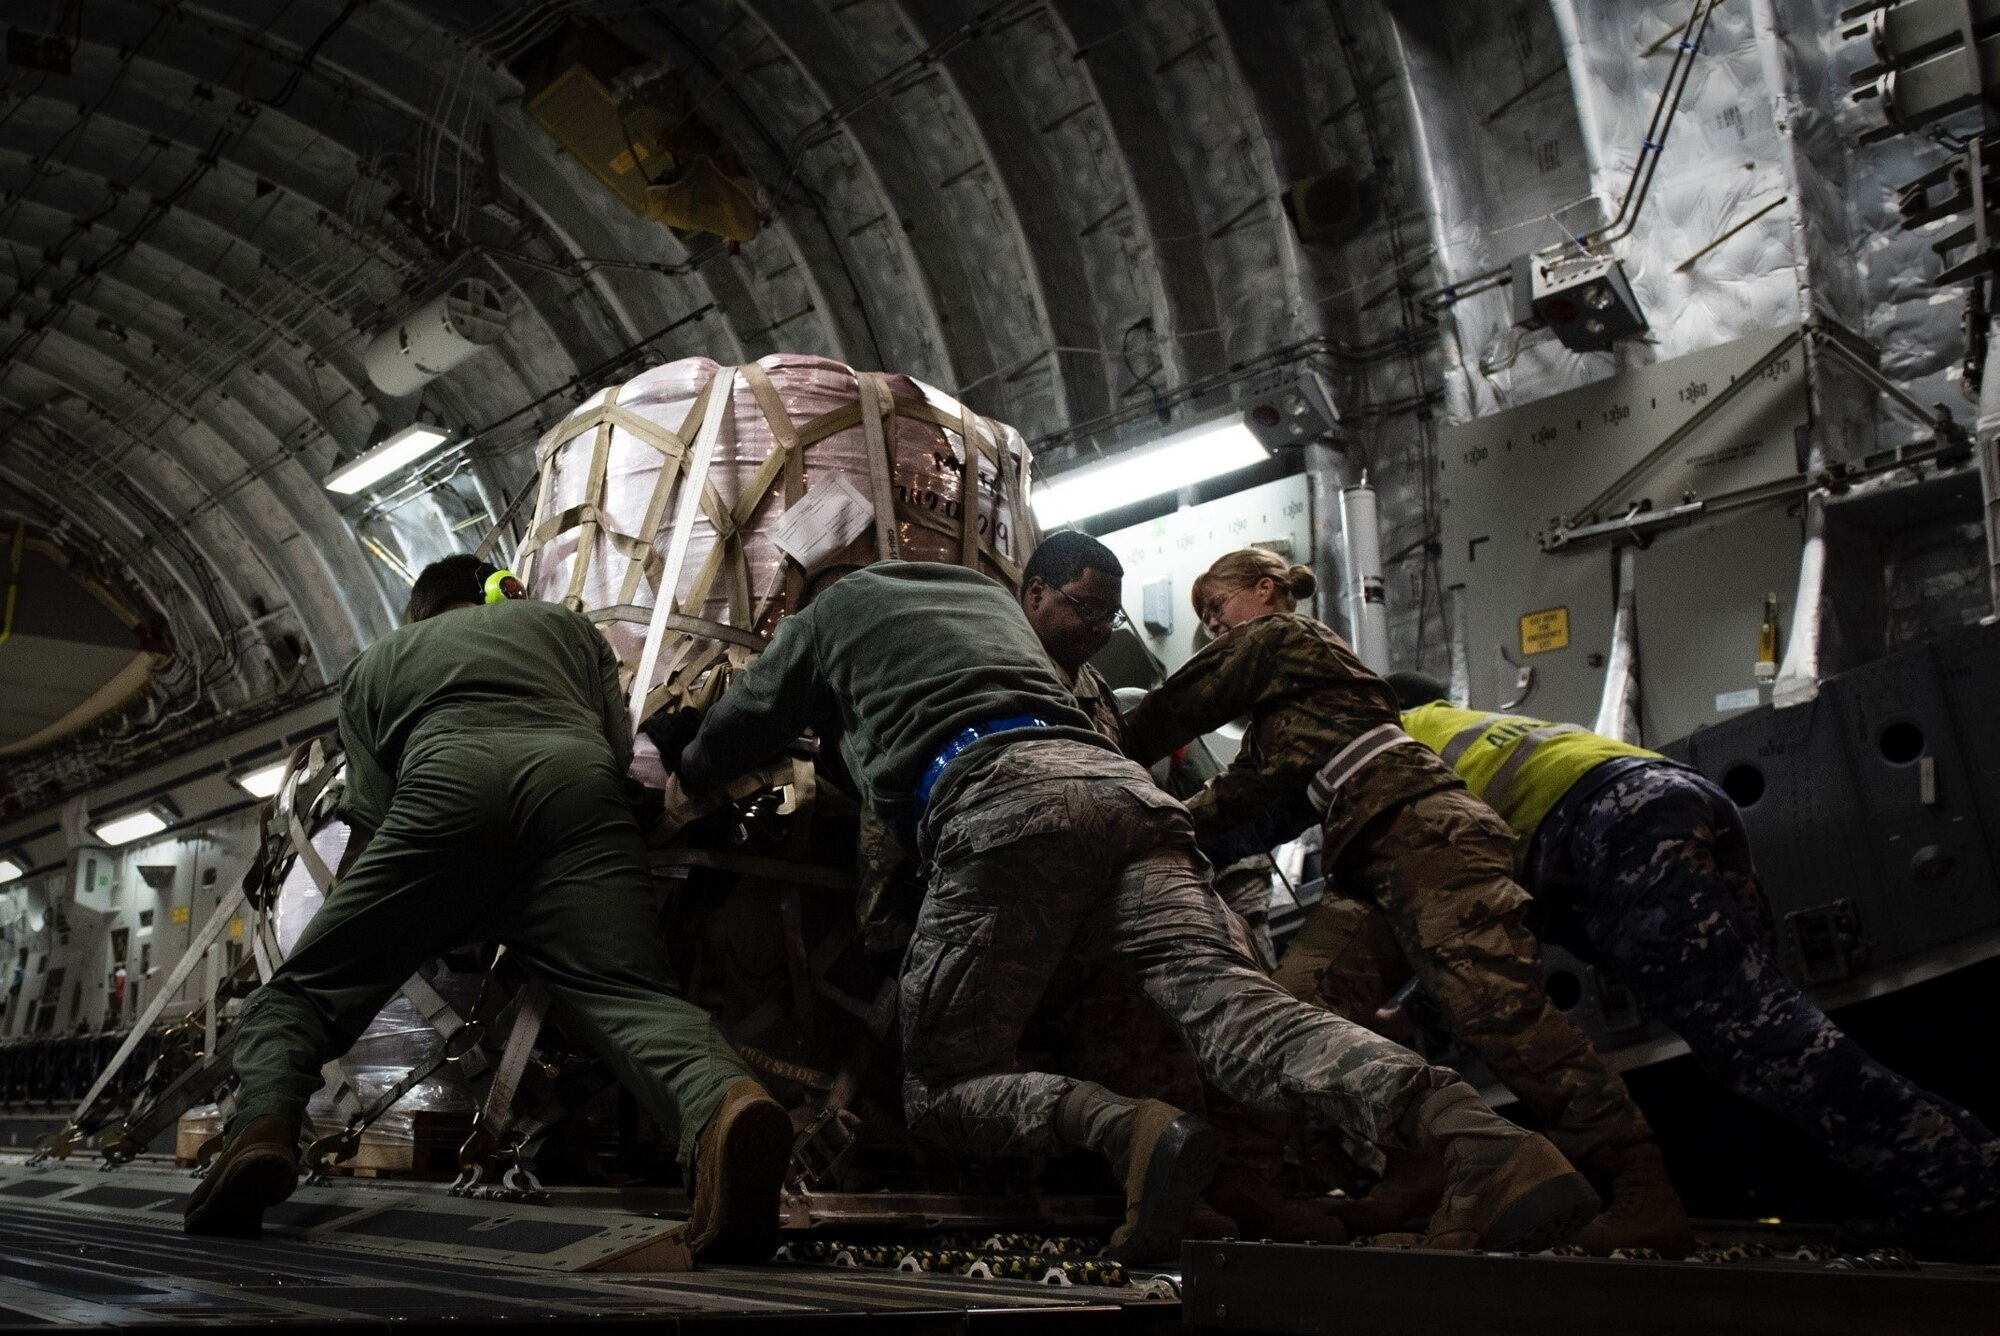 U.S. and Australian airmen worked together to loaded the aircraft with materials to aid in Australian wildfire relief